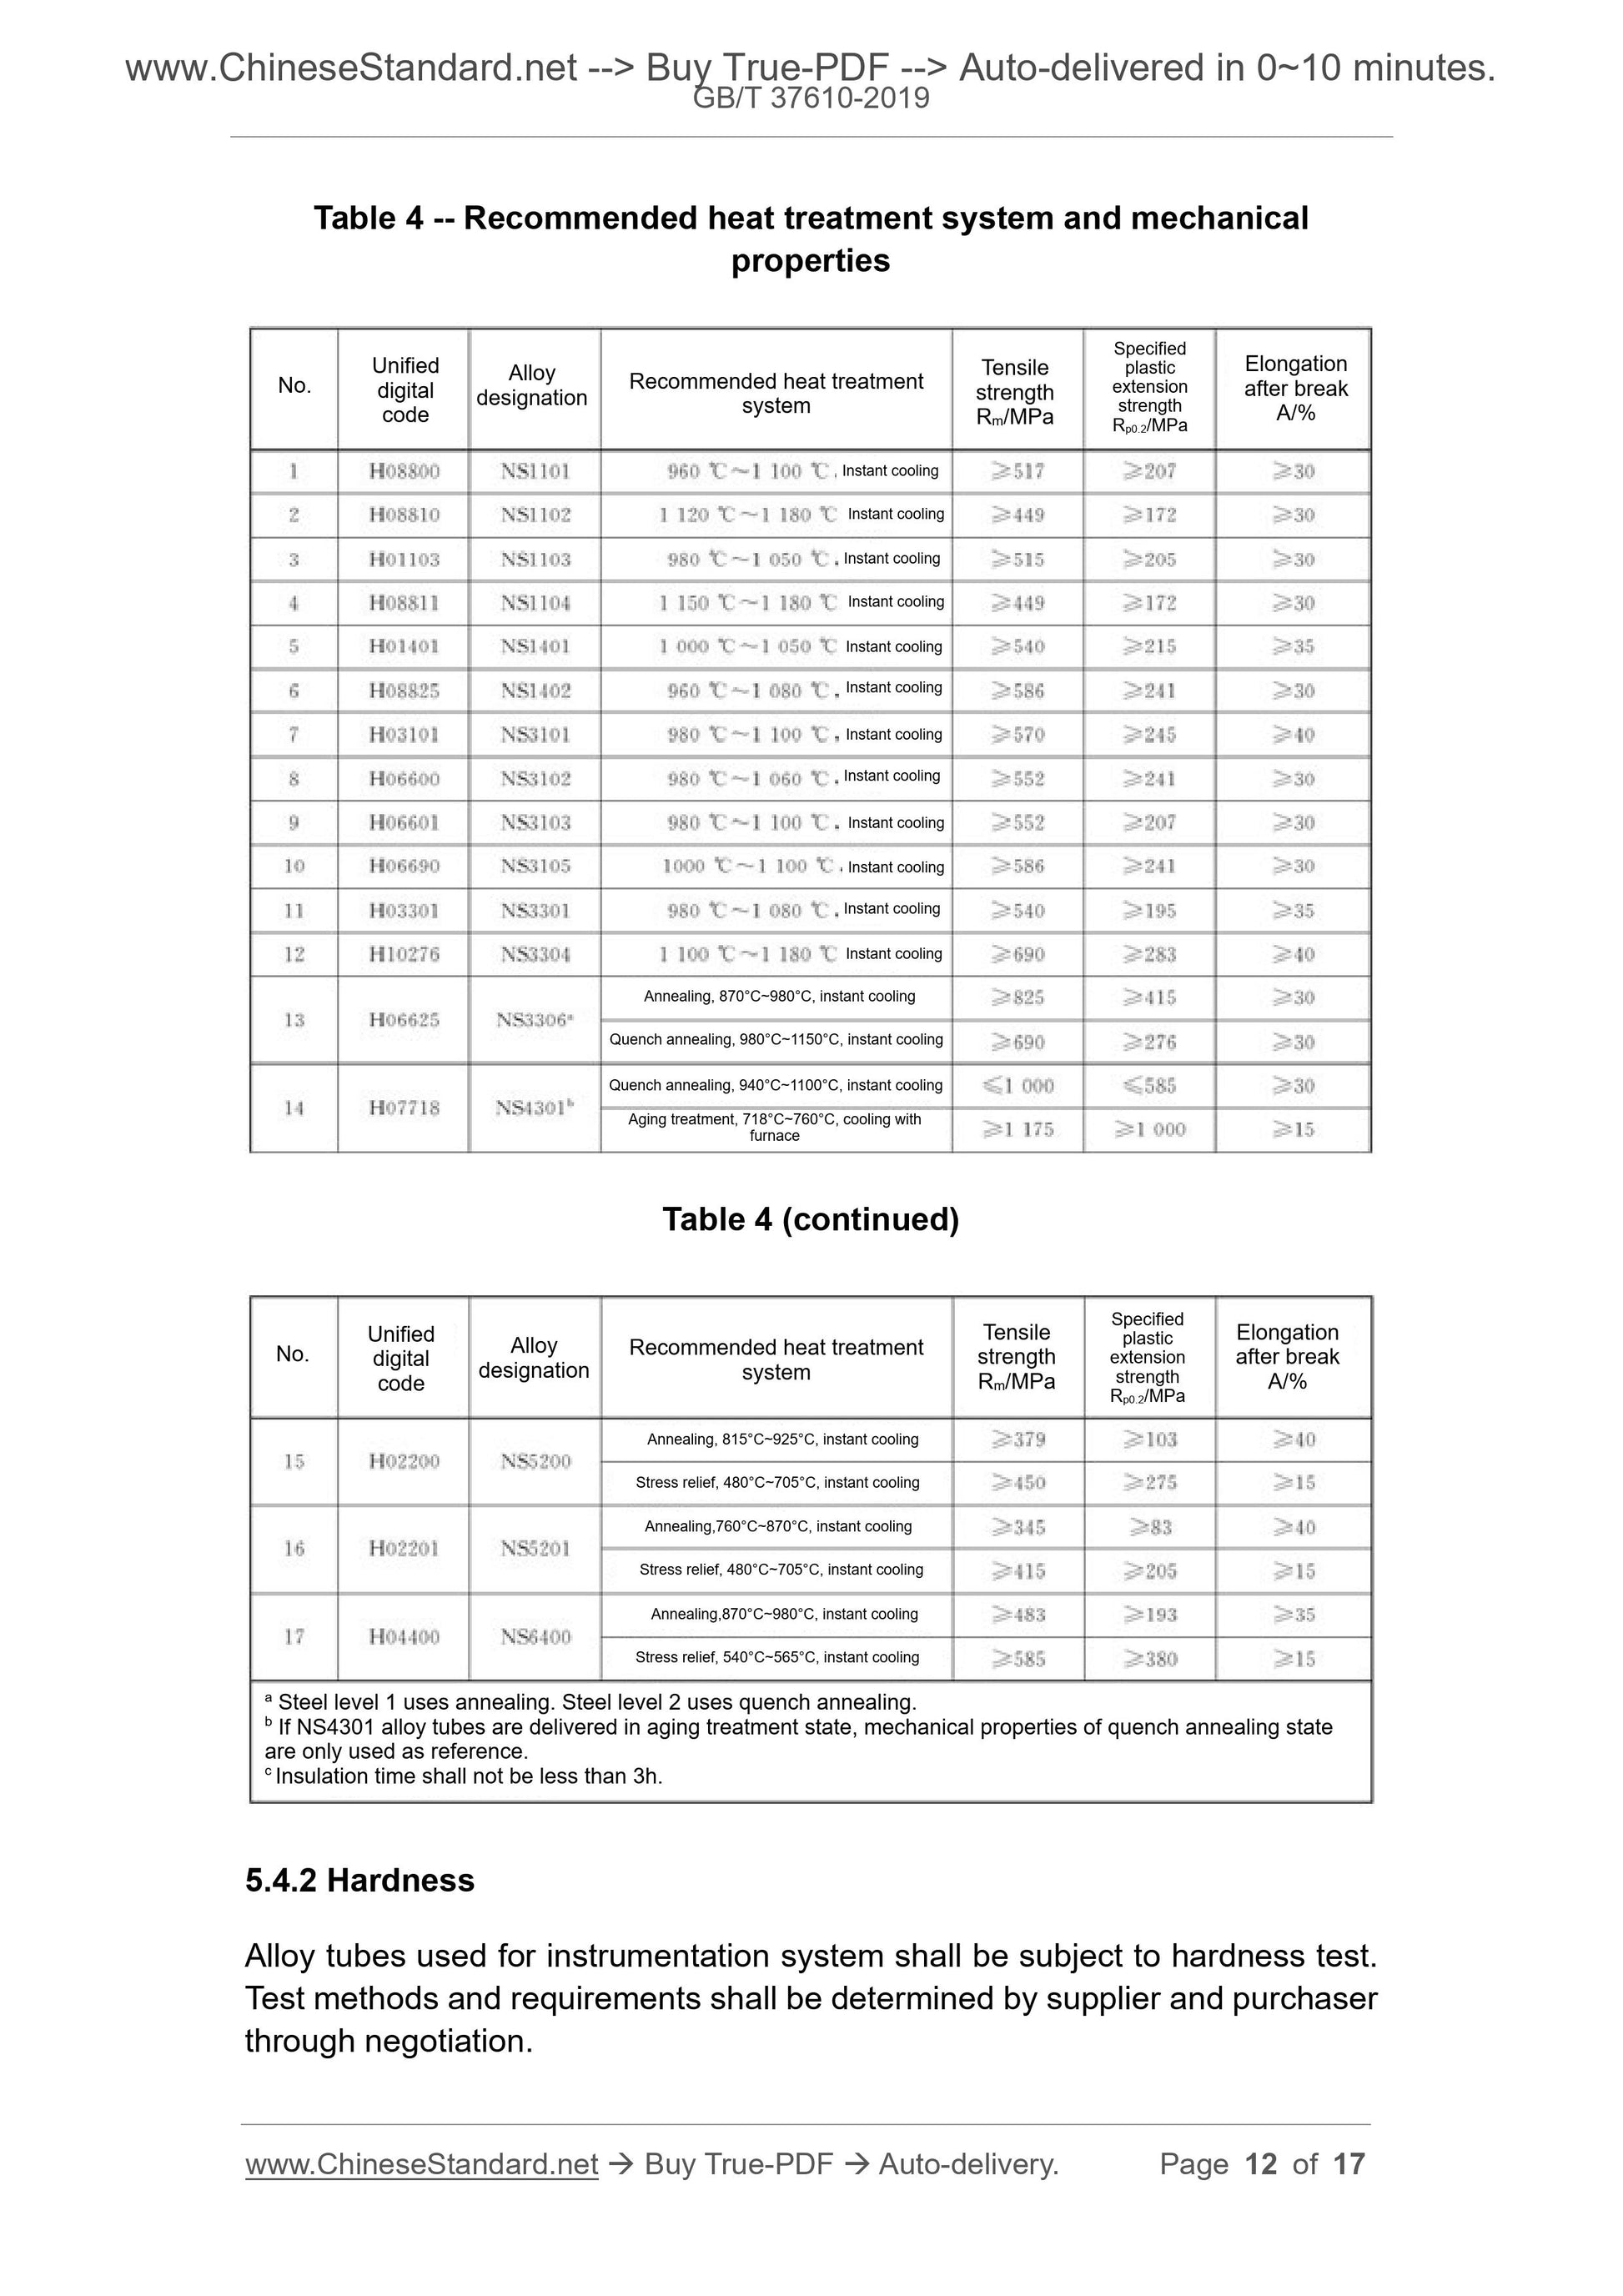 GB/T 37610-2019 Page 12